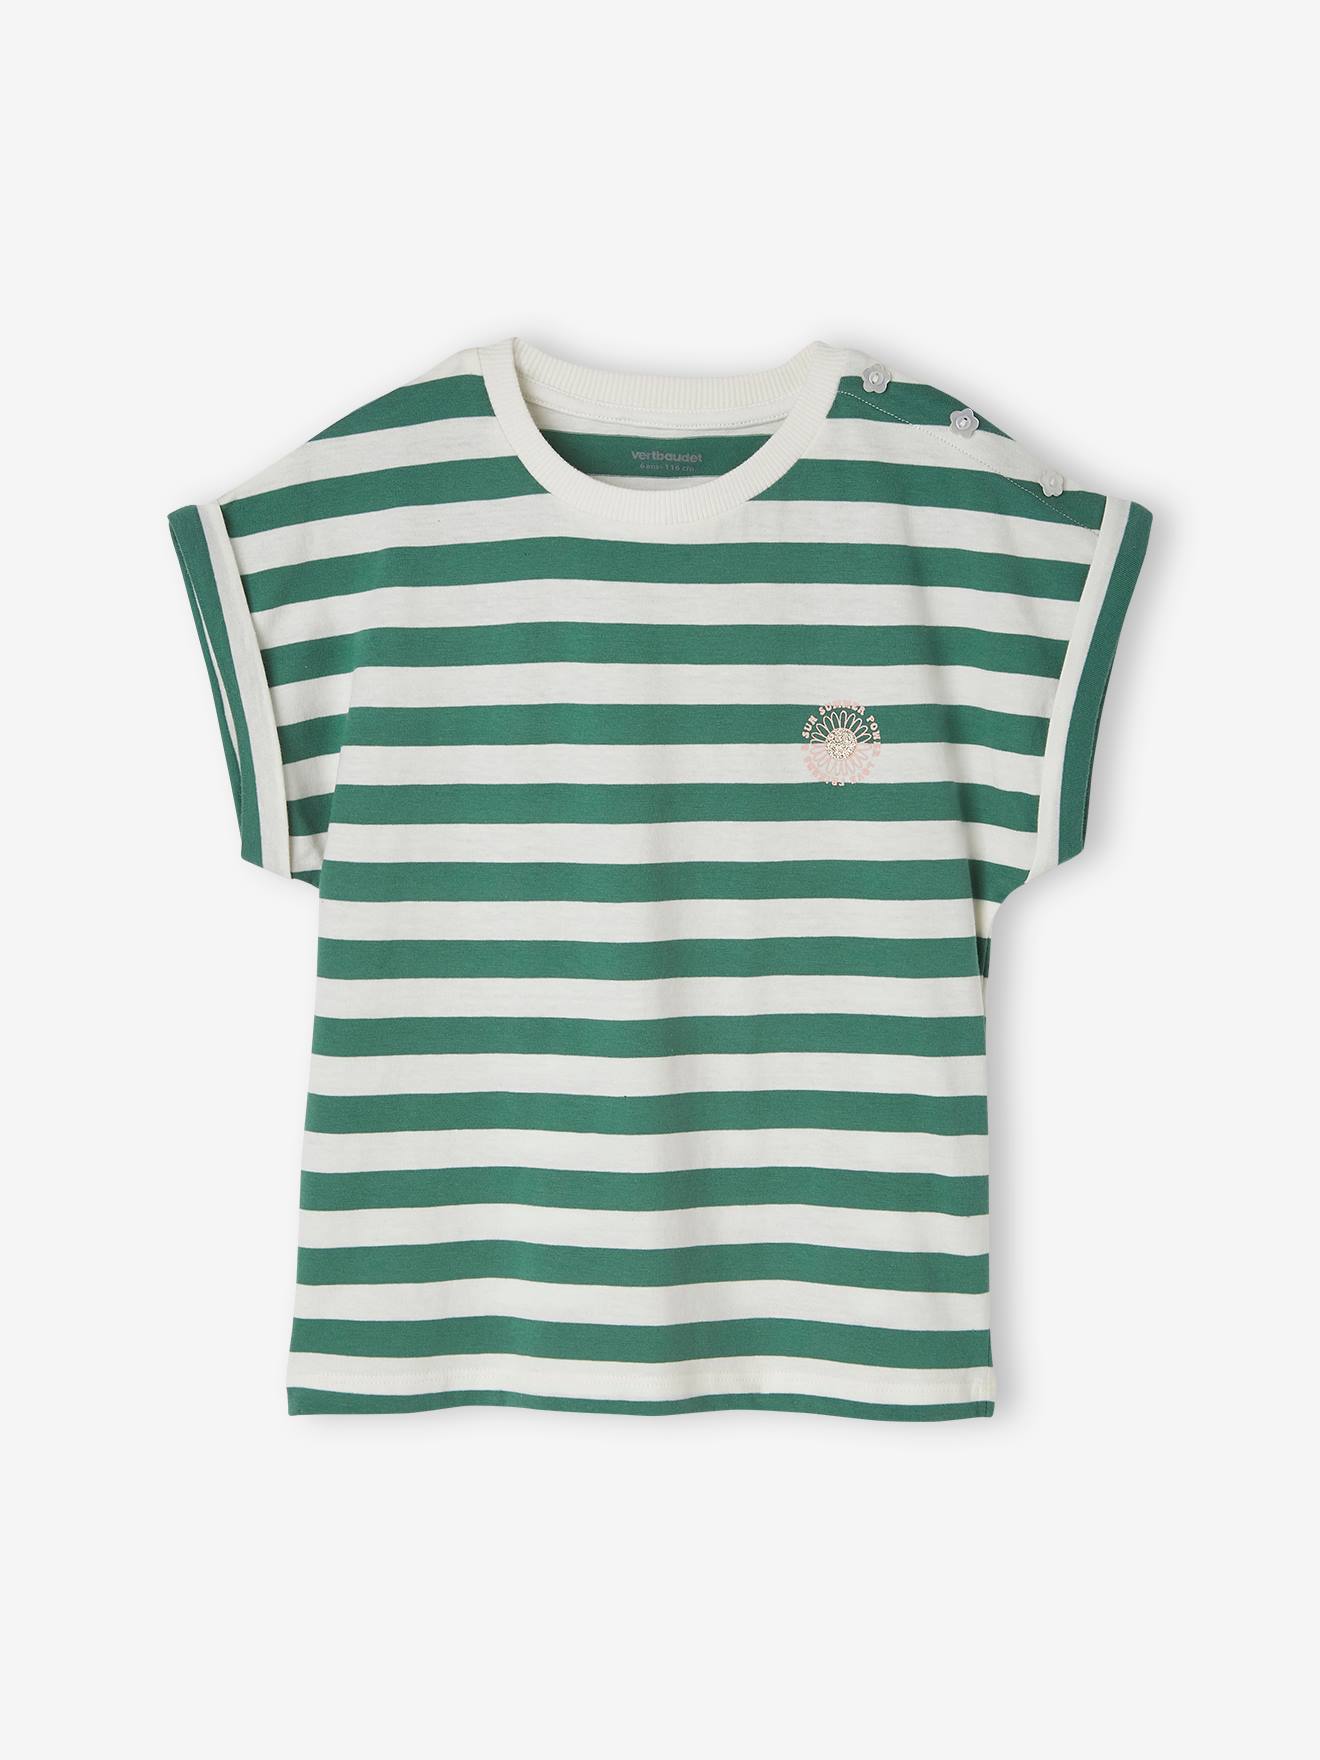 Striped T-Shirt for Girls striped green